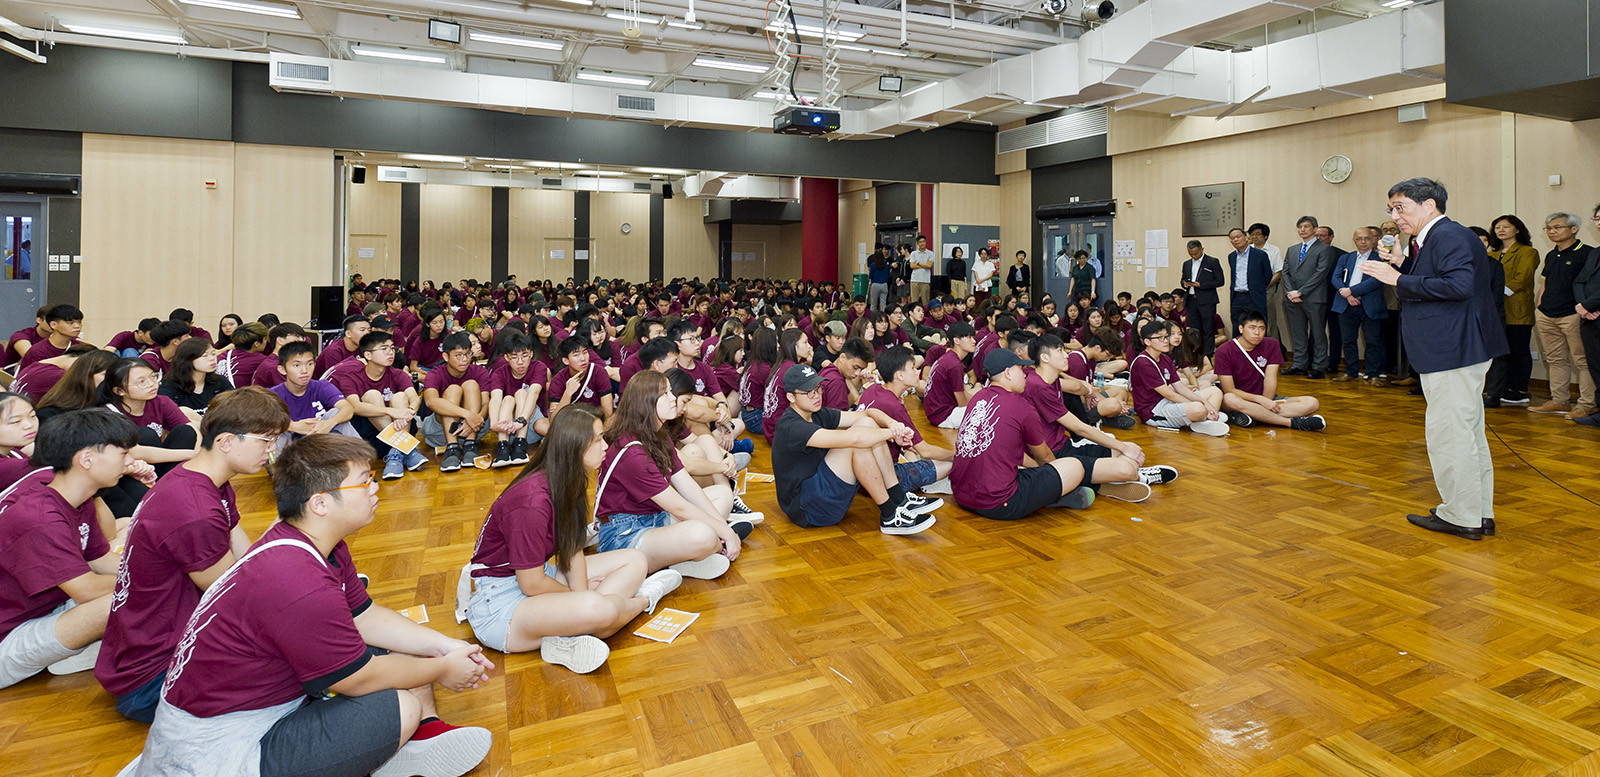 President Kuo met and greeted around 200 new students at the annual O’Camp.